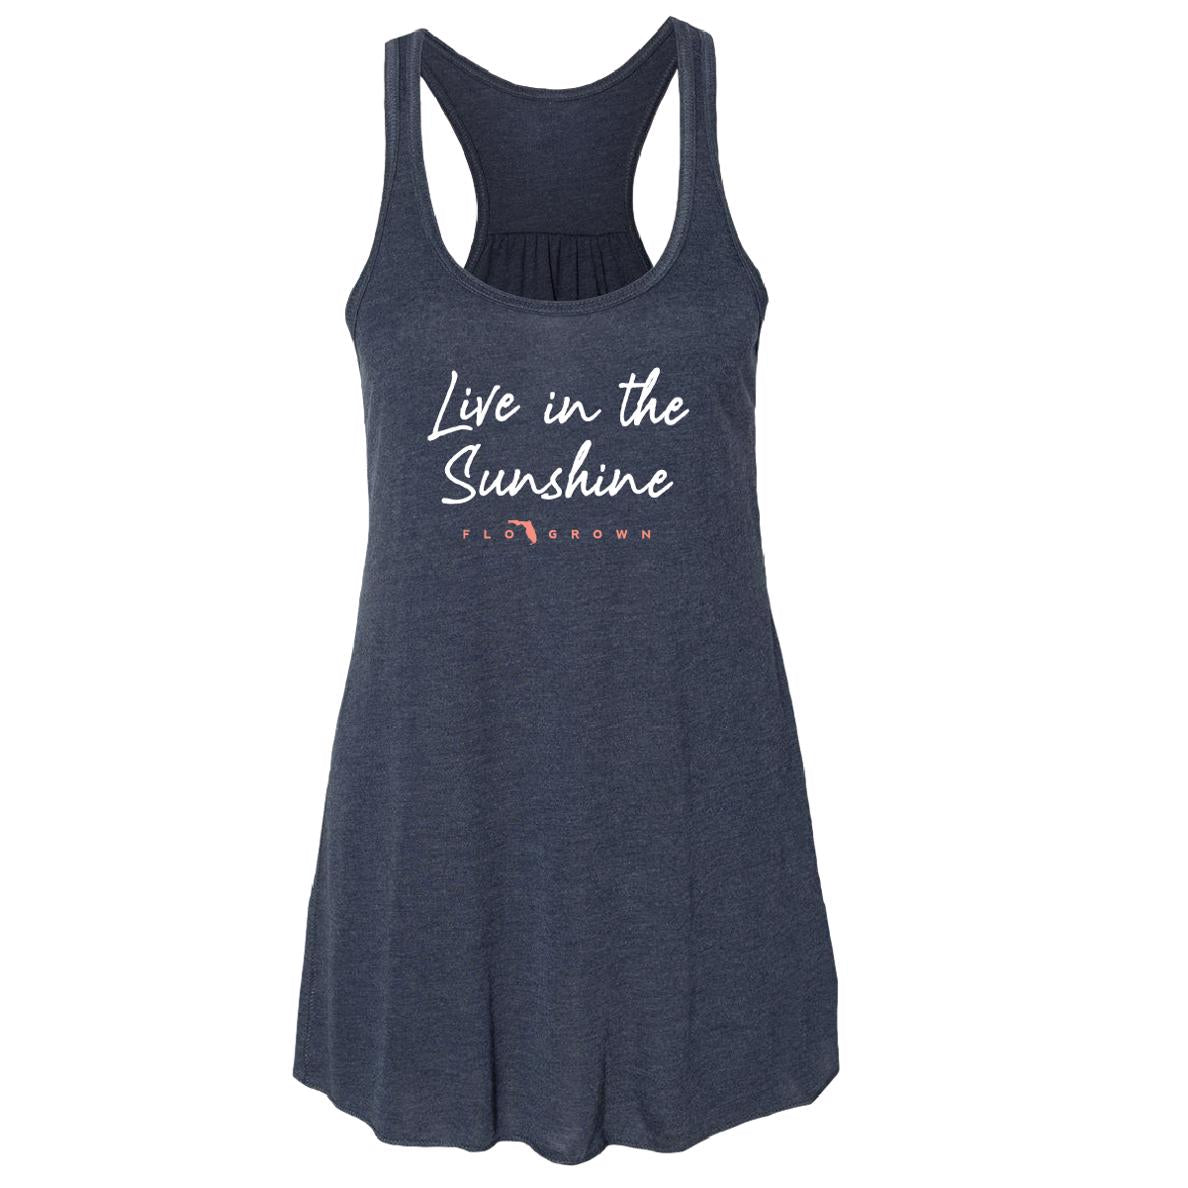 Live in the Sunshine tank (front)